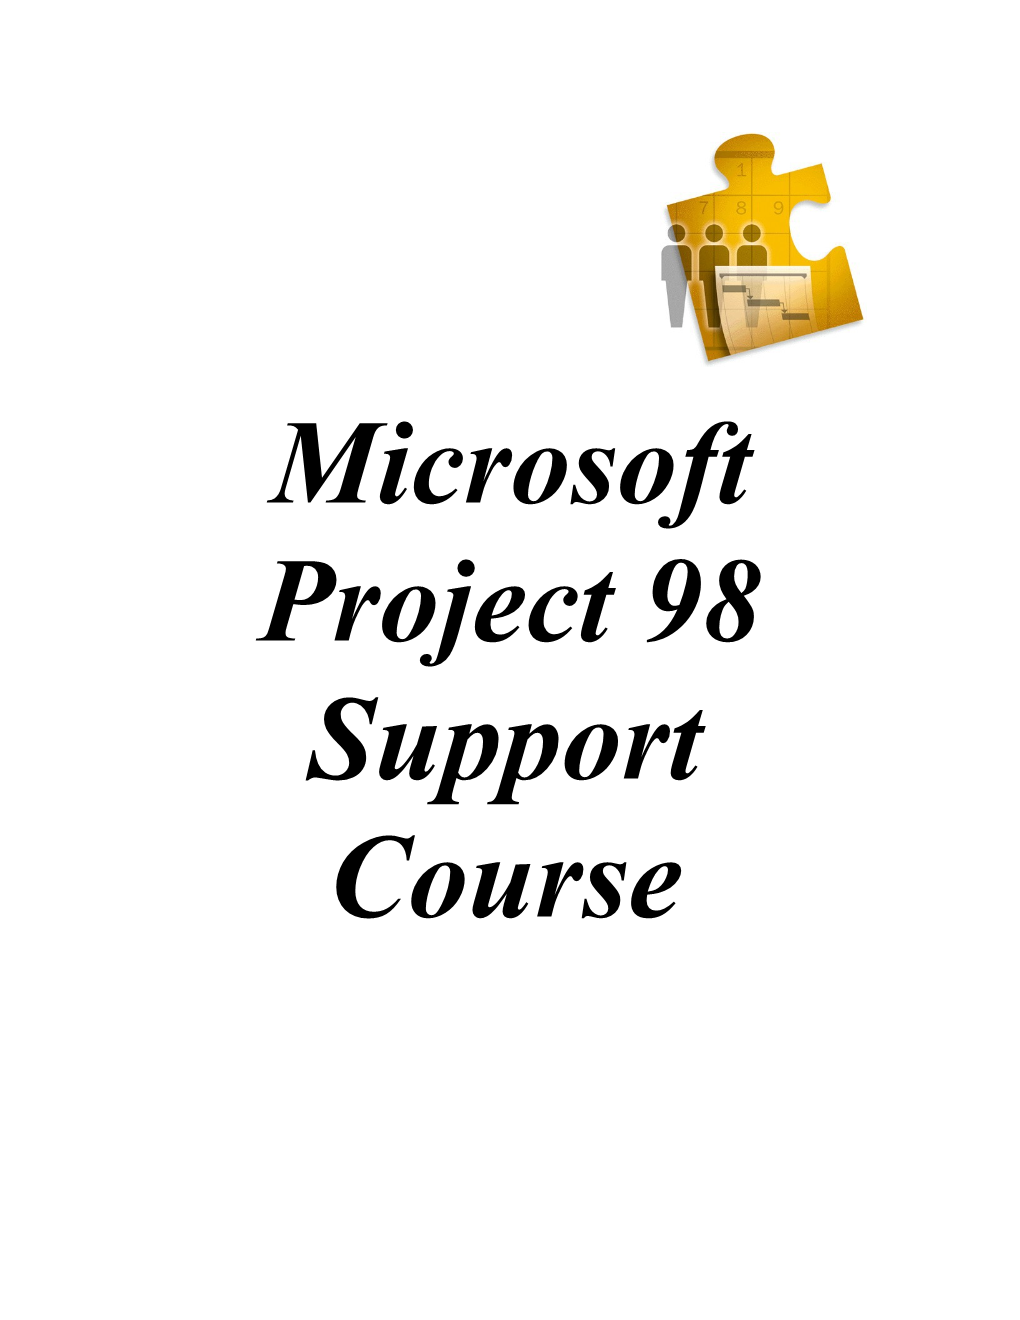 Microsoft Project 98 Support Course